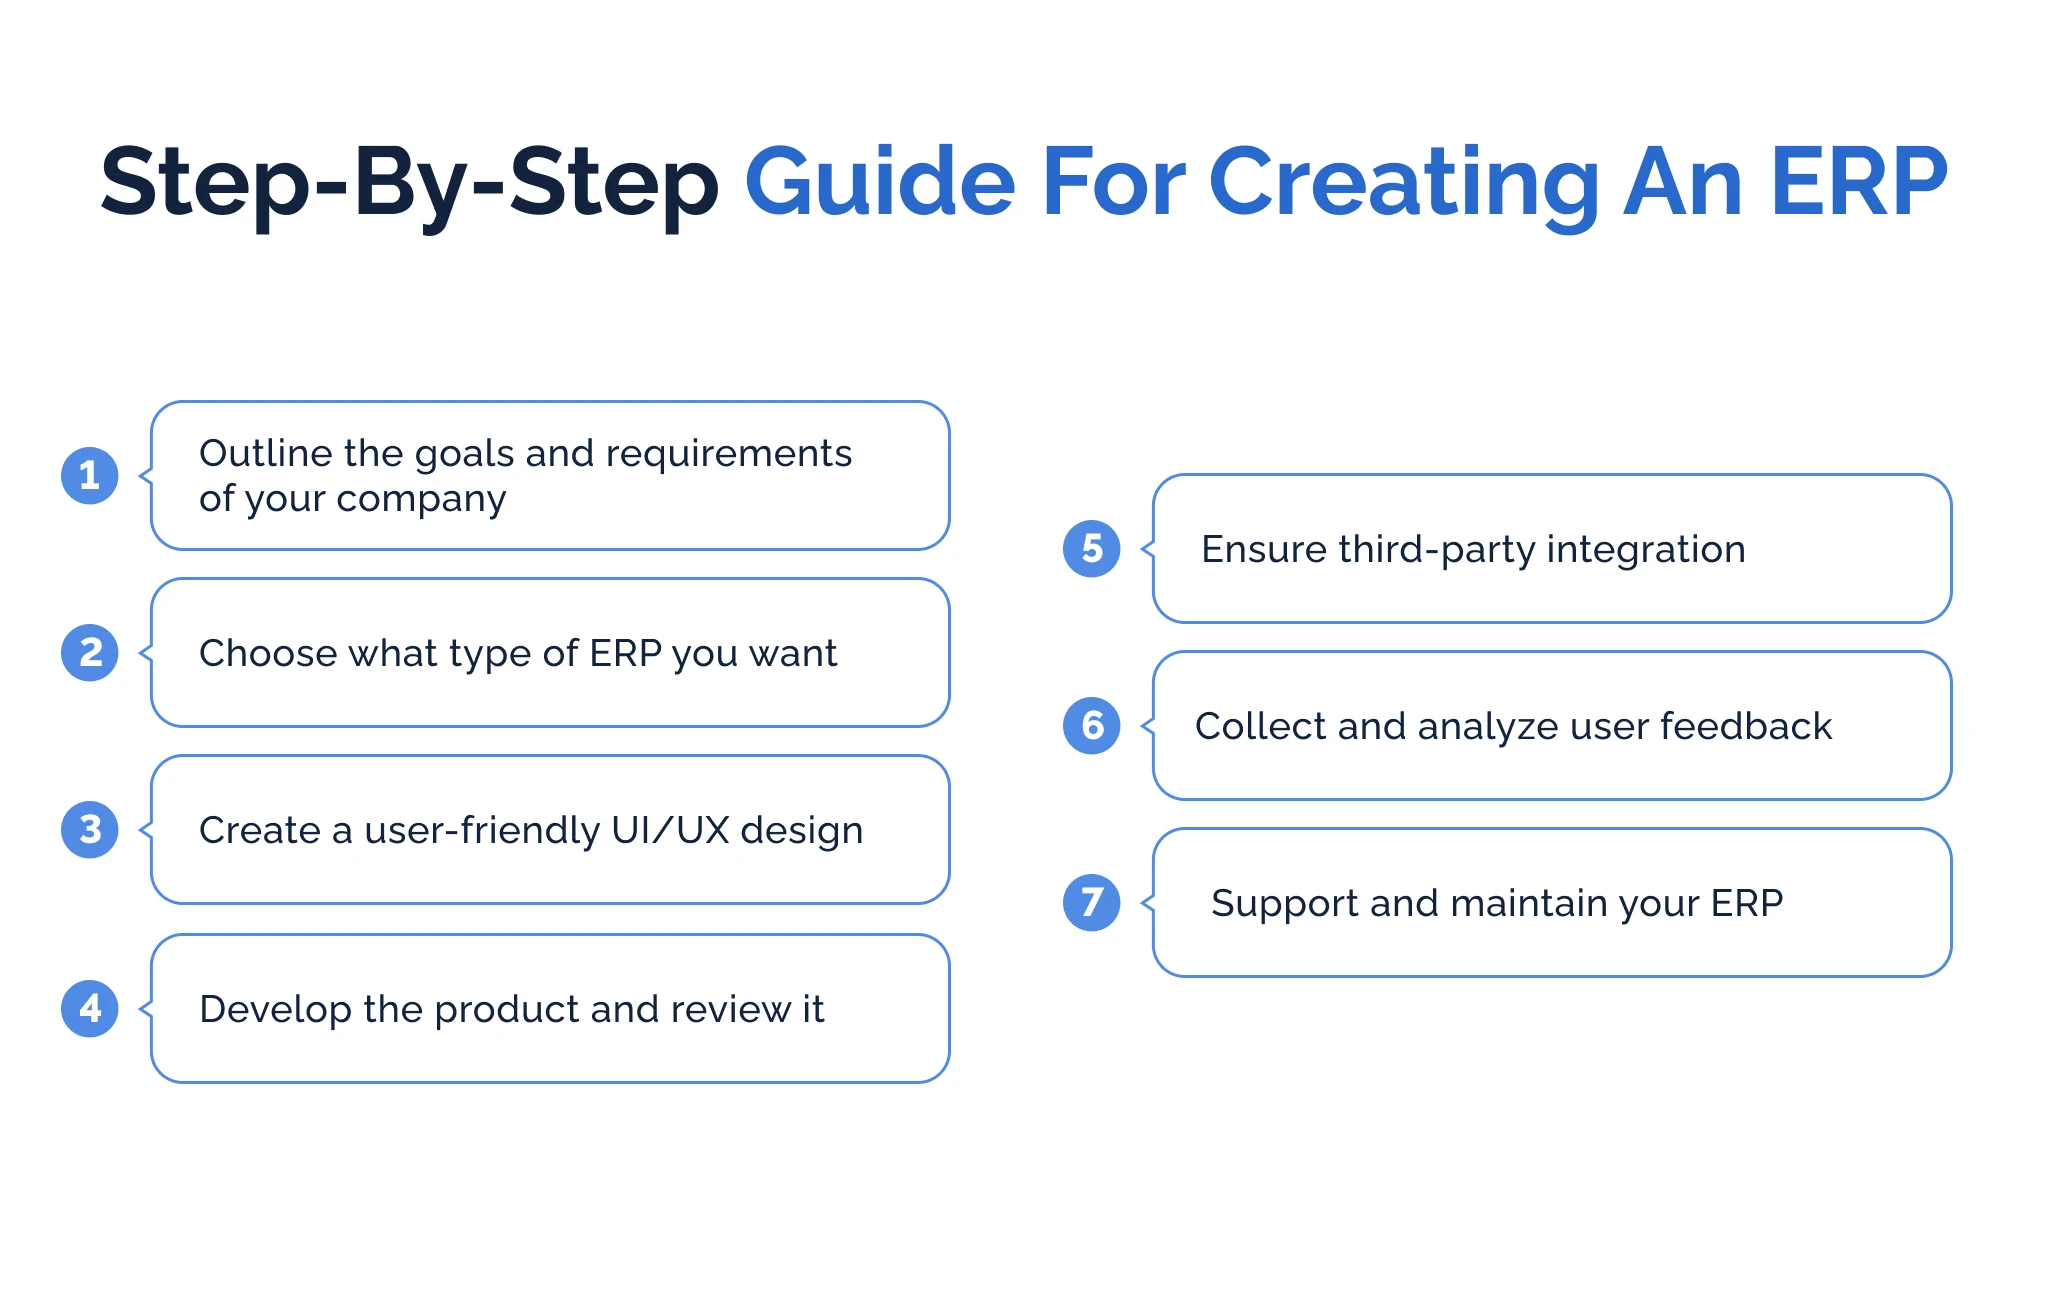 Step-by-step guide for creating an ERP